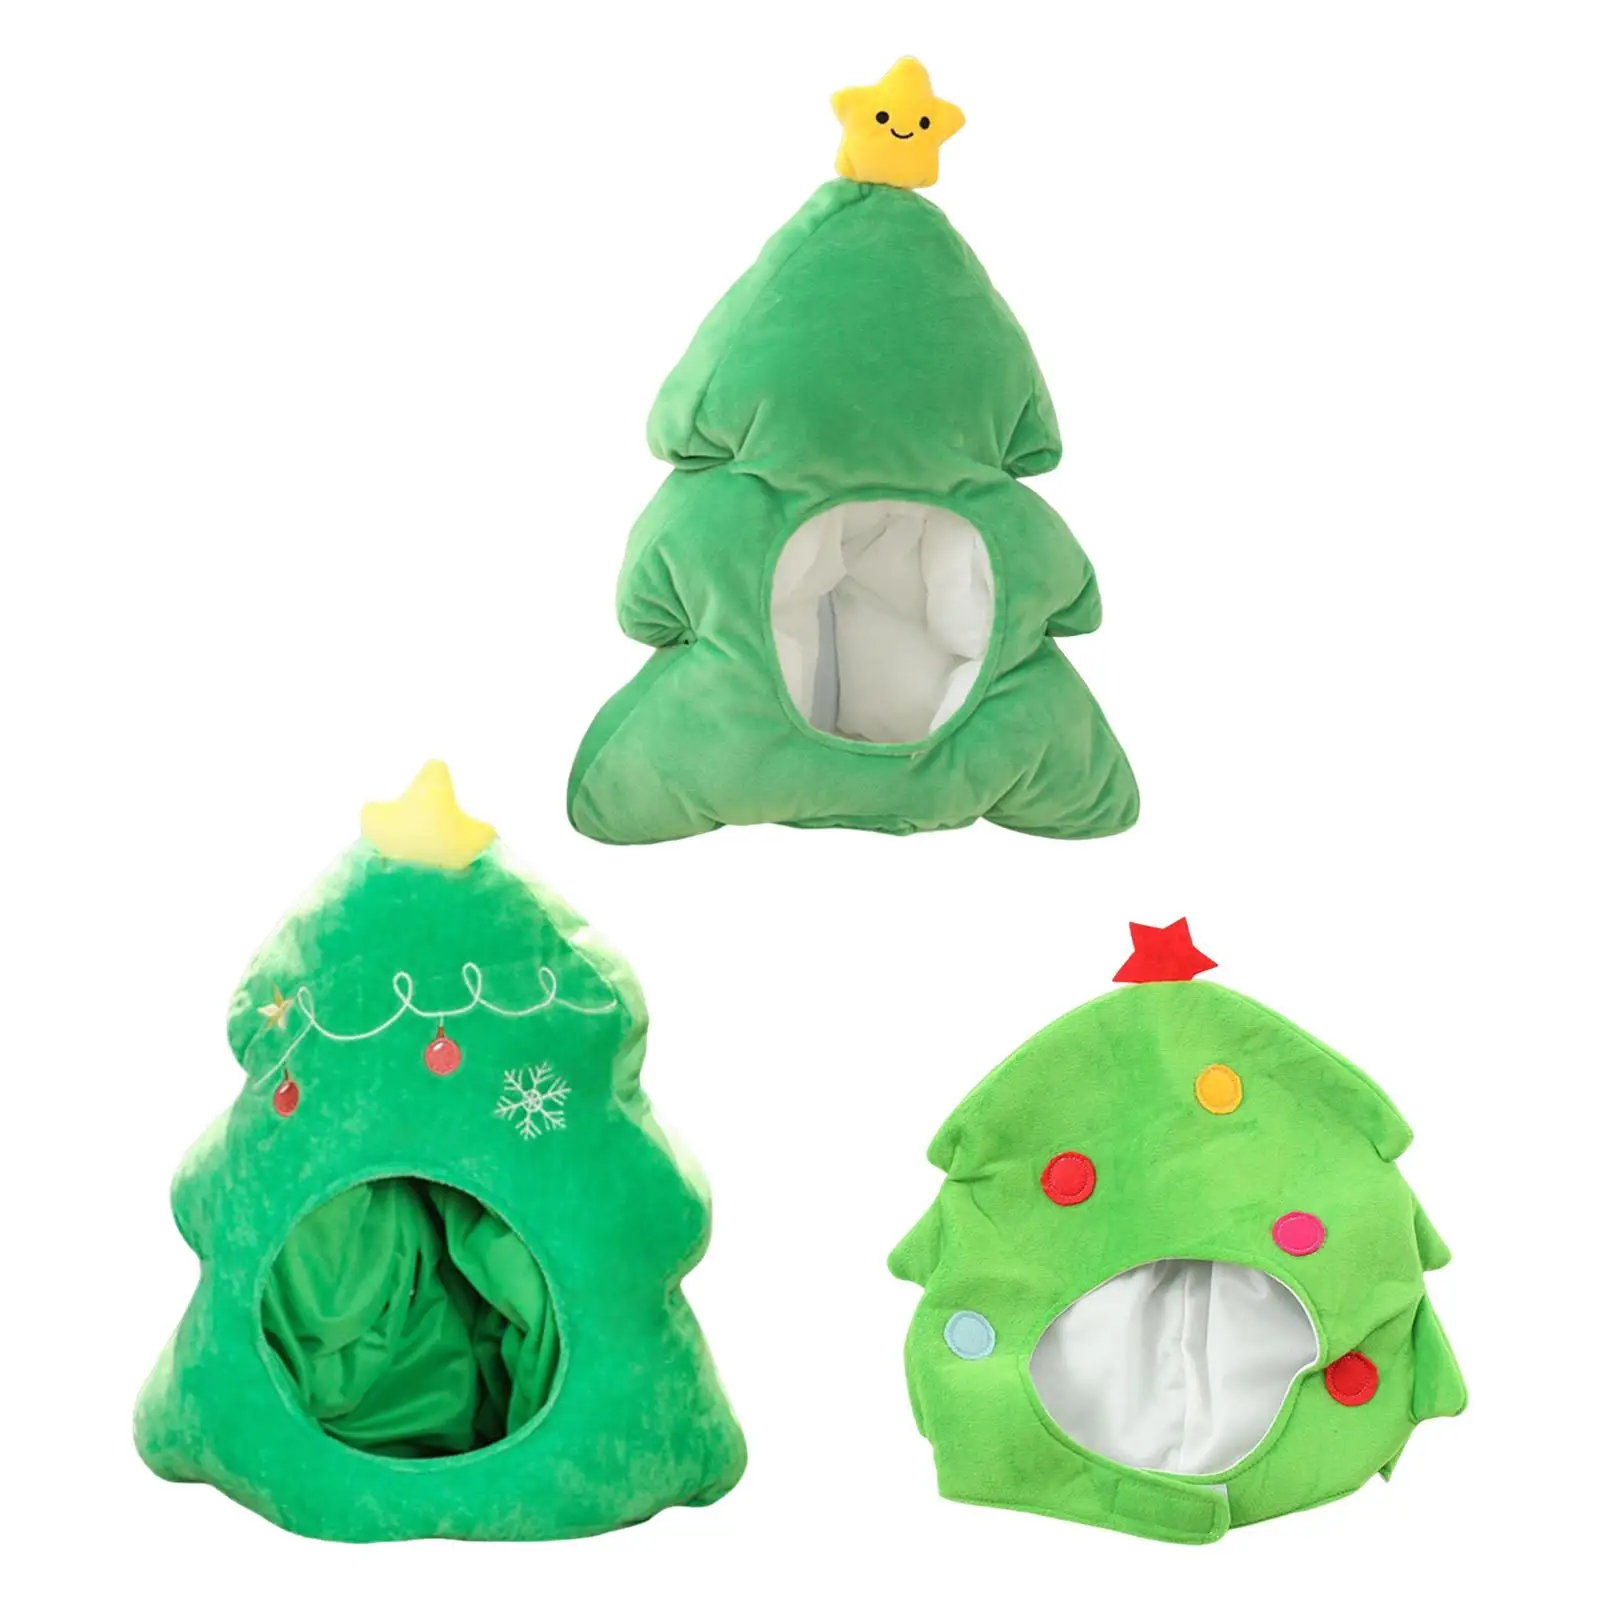 Funny Christmas Tree Plush Hat Cozy Comfortable Creative Gift Unisex Xmas cap for Cosplay Costume Festival Dress up